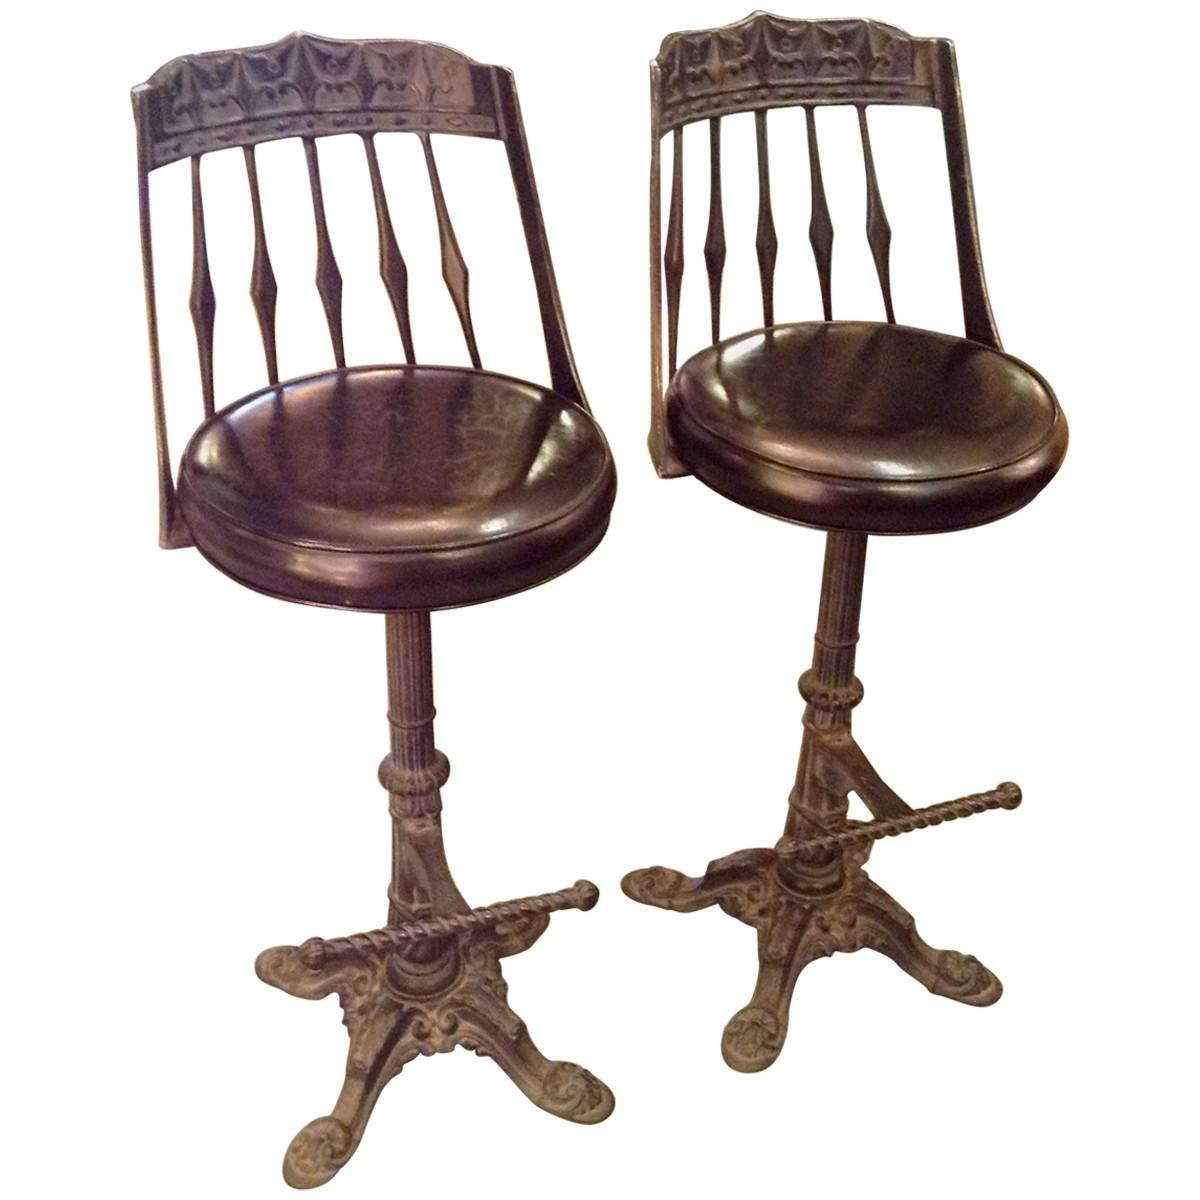 Imbued with an unmistakable heirloom feel, these vintage bar stools have elaborately cast iron bases and plush leather seats. The unique textures and patinas of these pieces add a heritage feel to any bar or breakfast counter. Sold in a set of